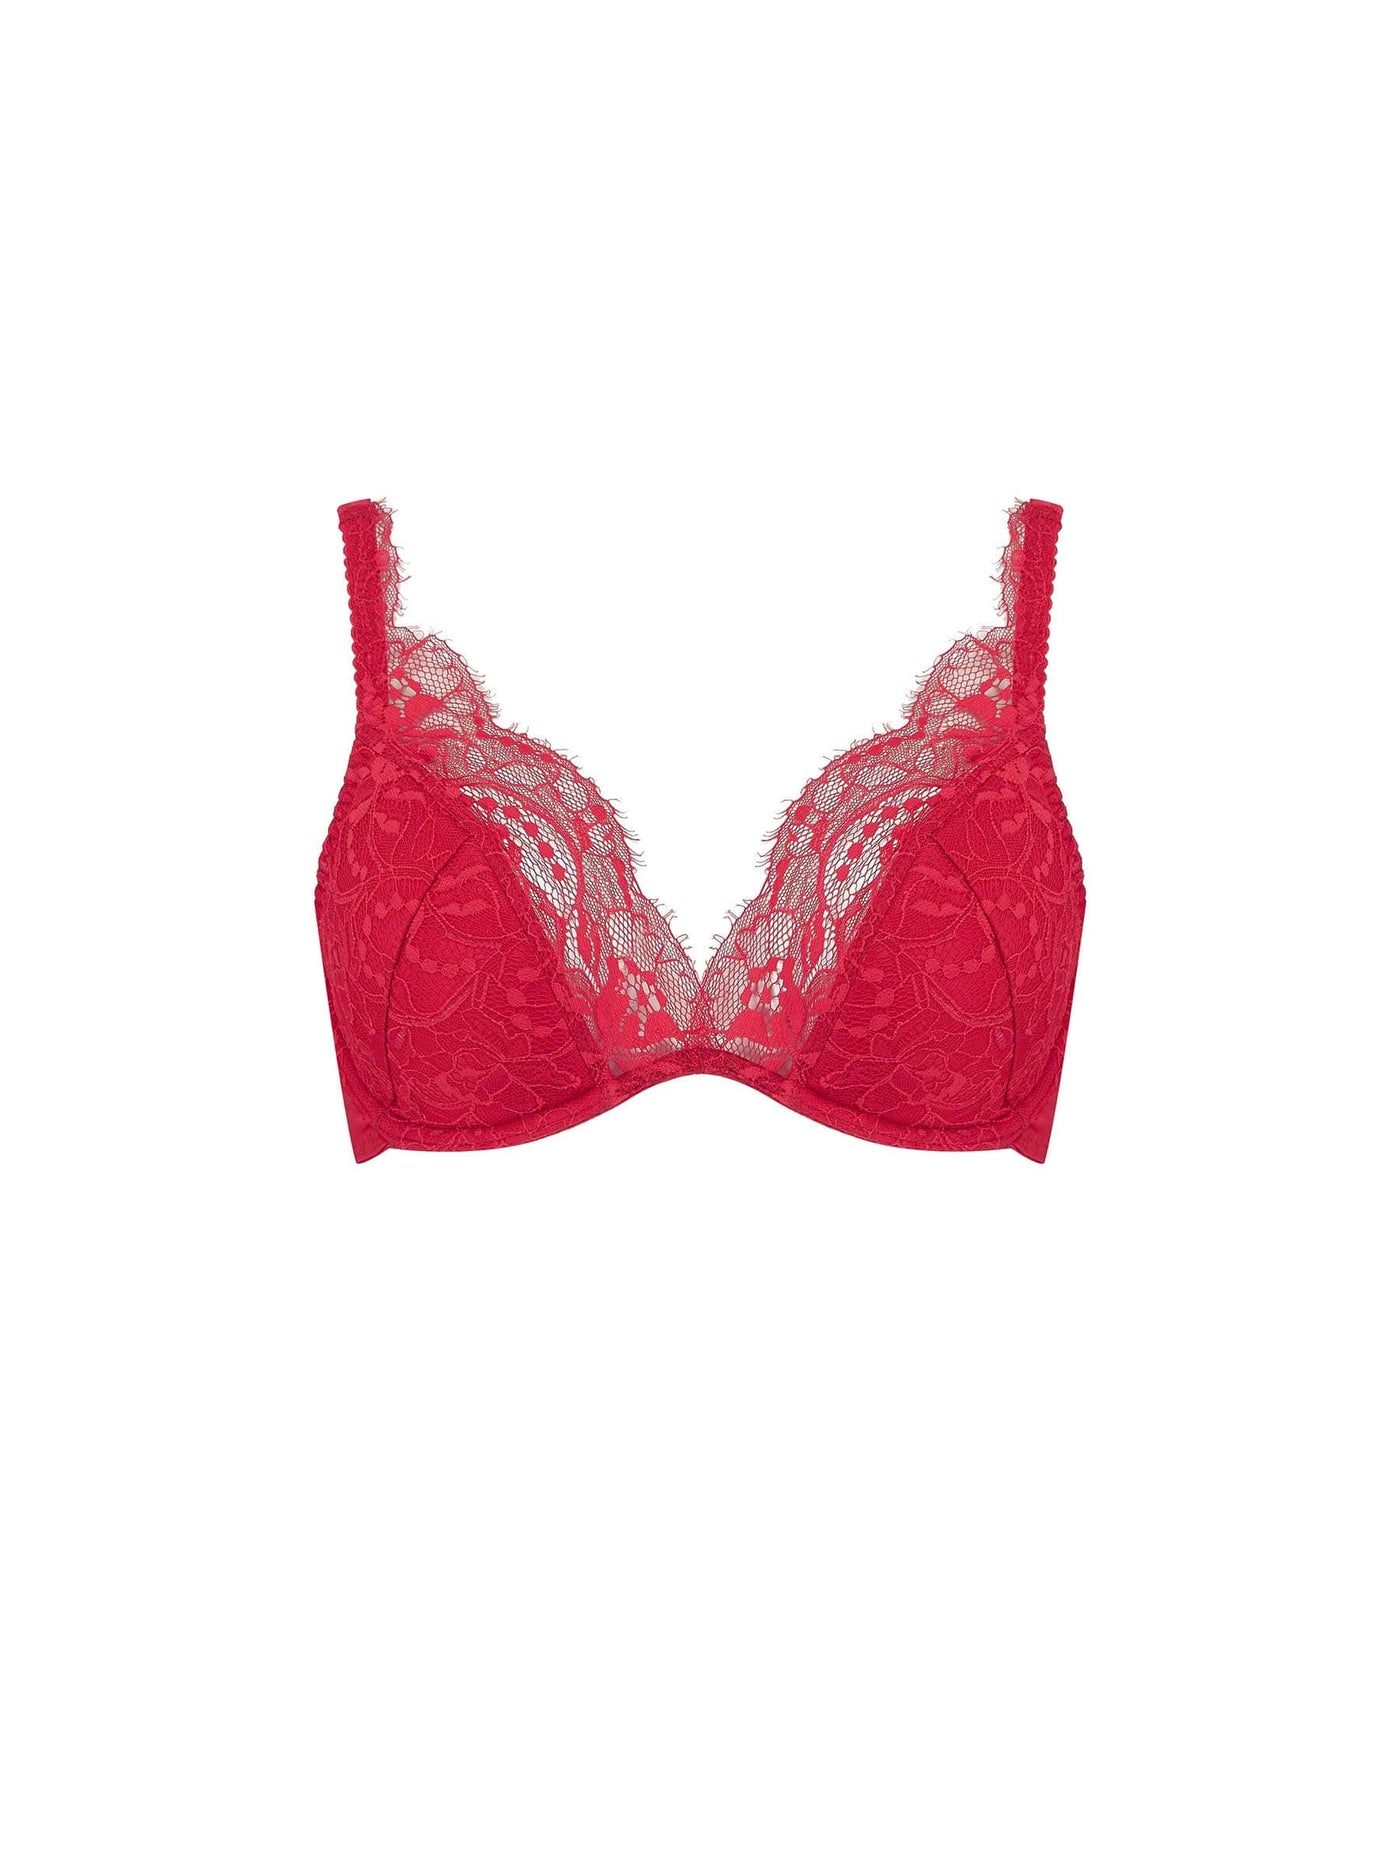 Front of Fleur of England red silk and lace padded plunge bra from the Adeline collection.